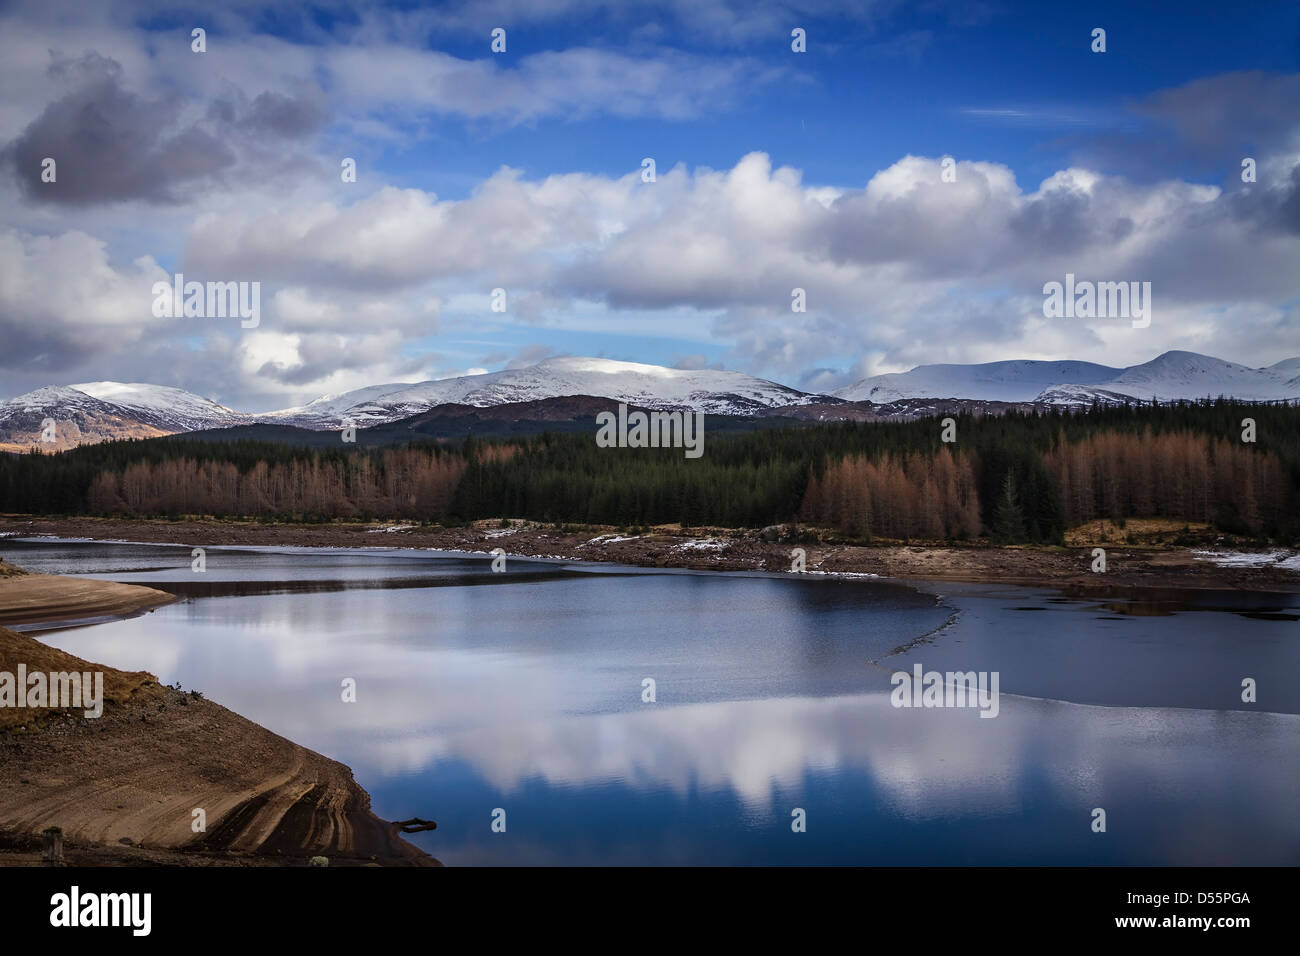 Low water on a partially frozen Loch Laggan with snow covered mountains in the background, Western Highlands, Scotland Stock Photo